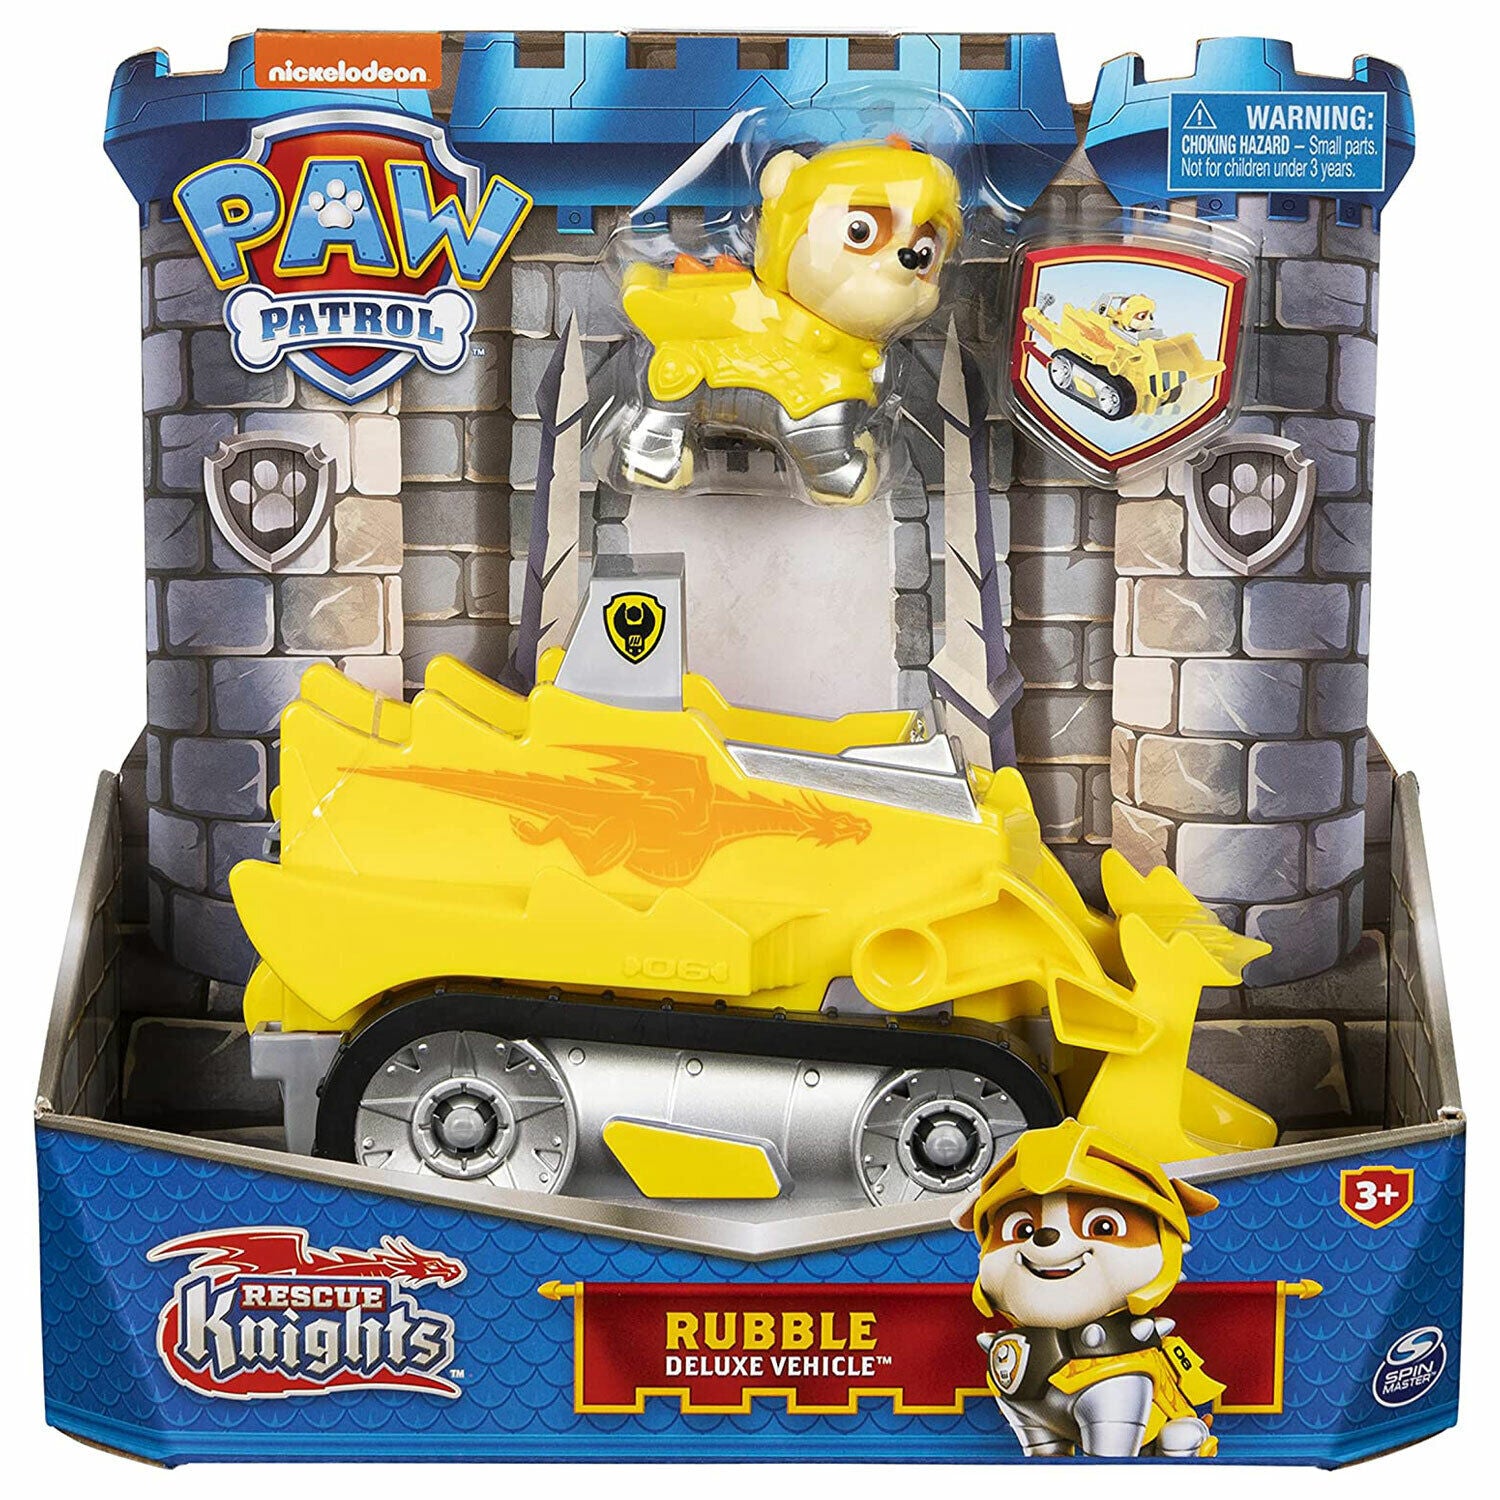 New PAW Patrol Rescue Knights Rubble Deluxe Vehicle - Ready for Action!